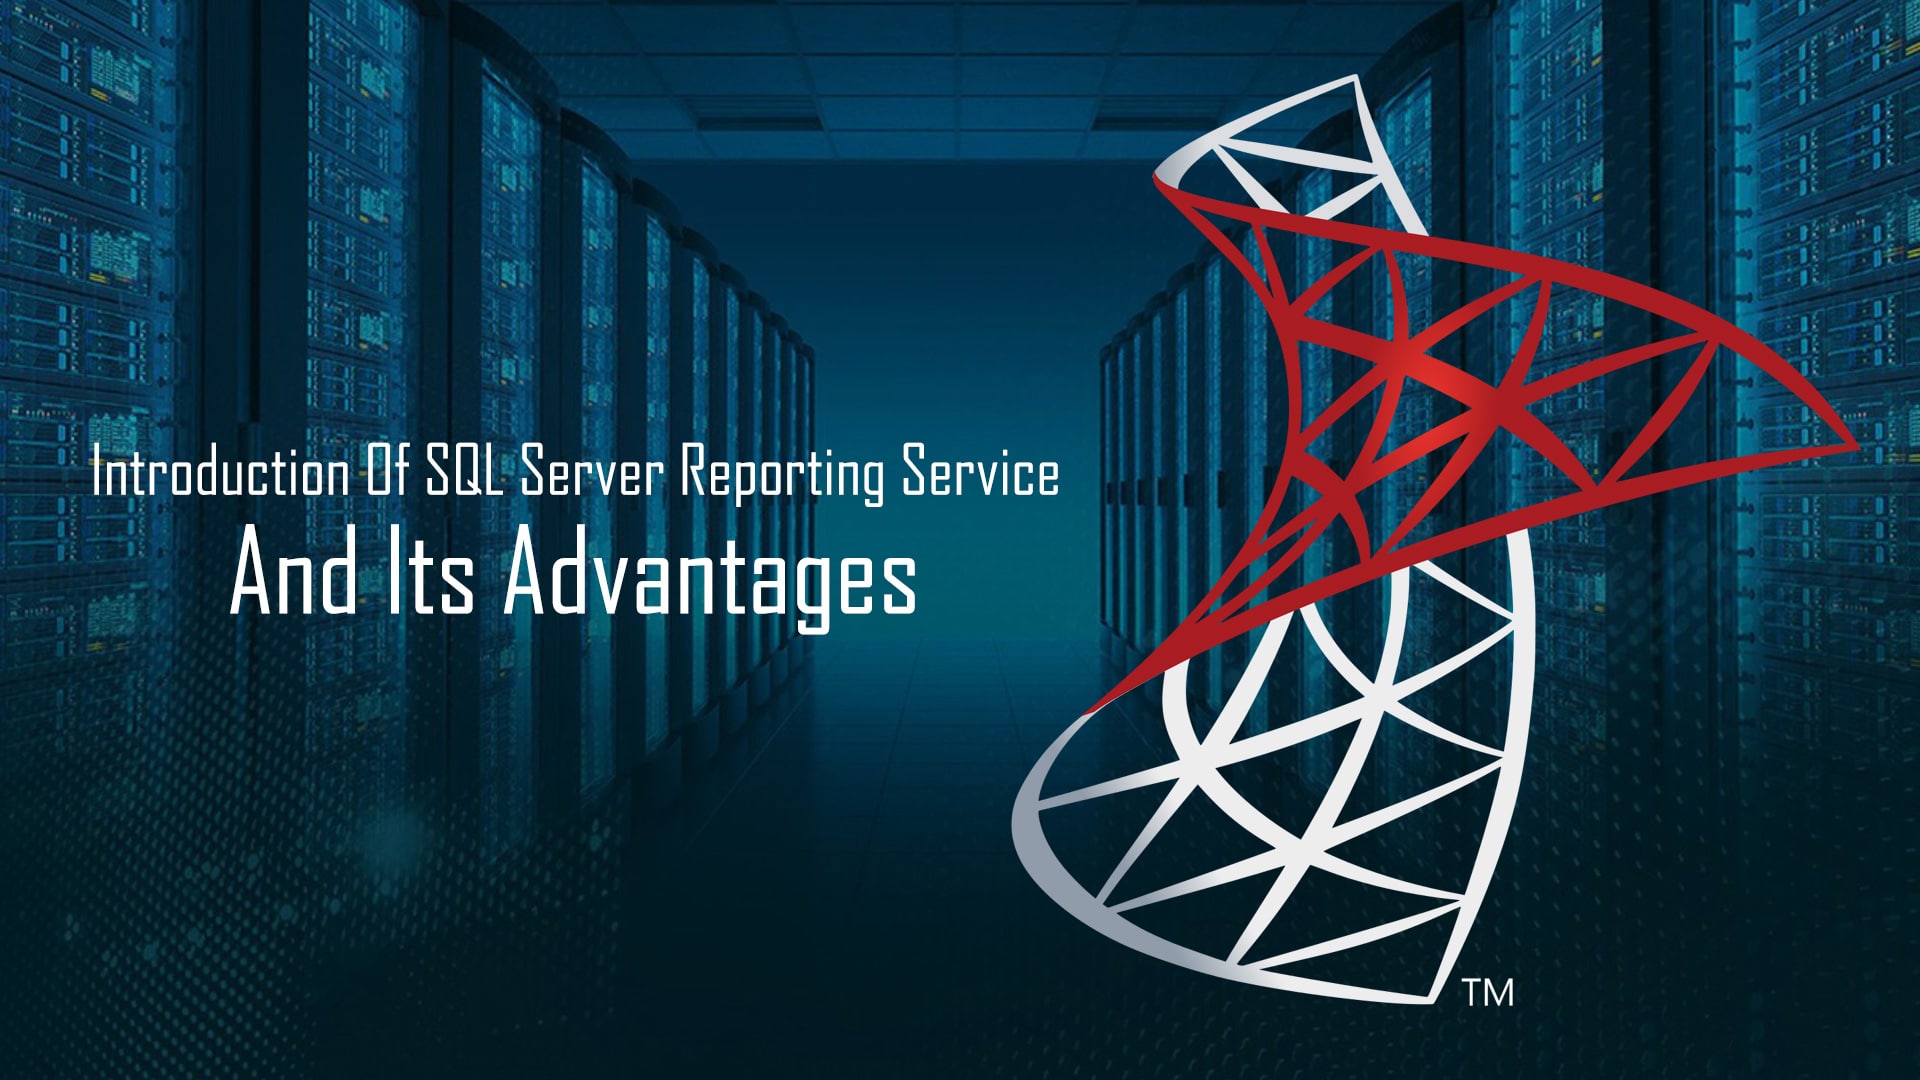 Introduction Of SQL Server Reporting Service And Advantages